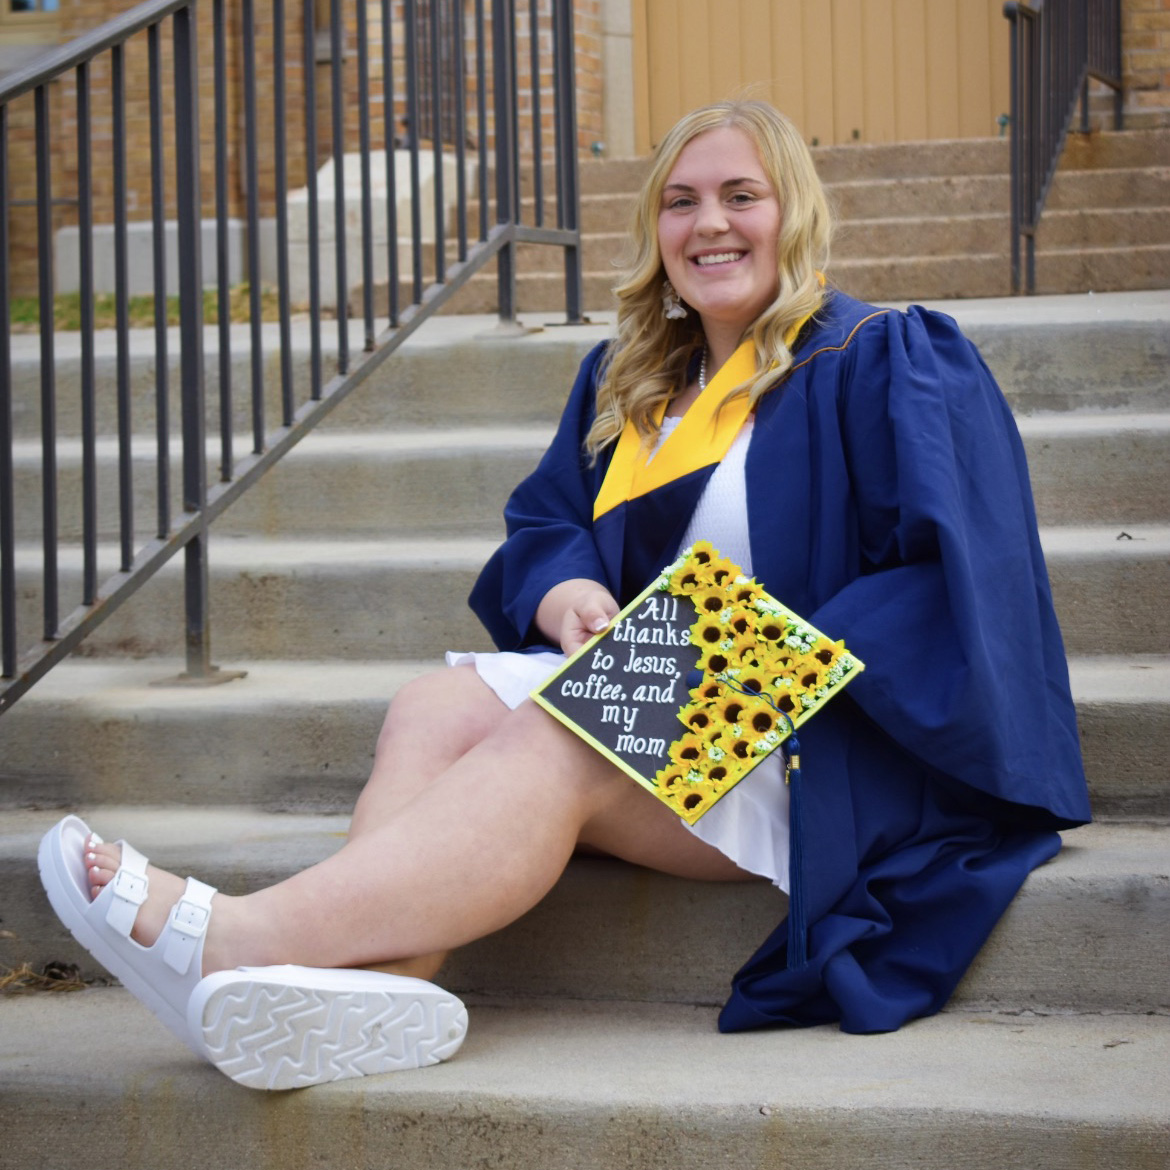 Karlee sitting on steps in her cap and gown